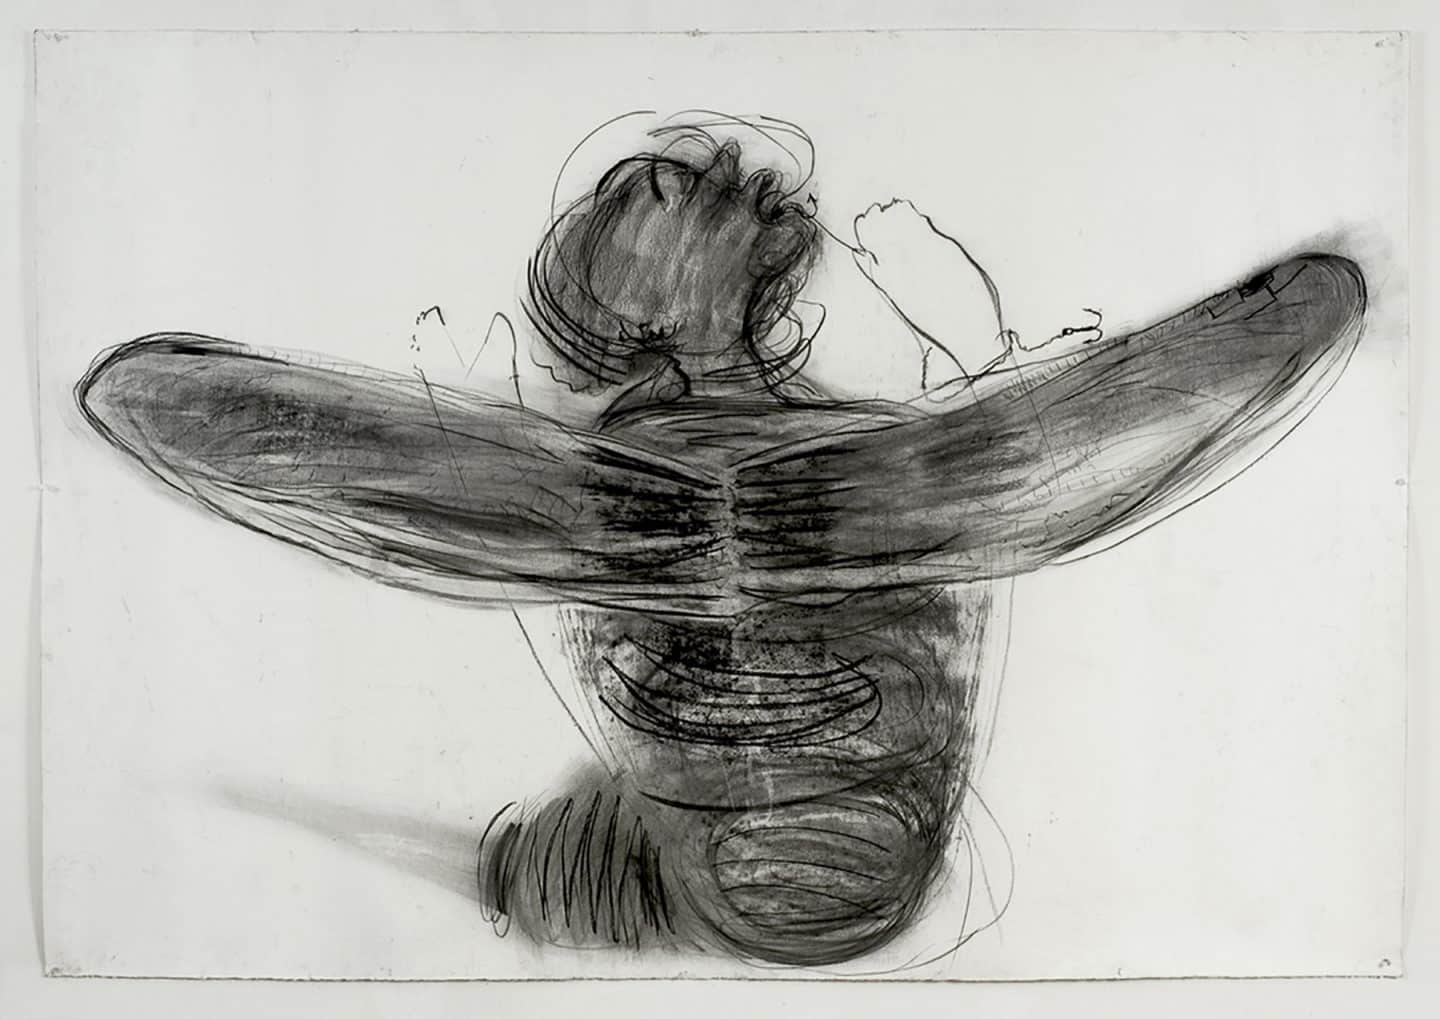 Gabrielle Sims, Hook, 2014, charcoal on paper. Purchase, J. Stuart Fleming Fund, 2018 (61-021)